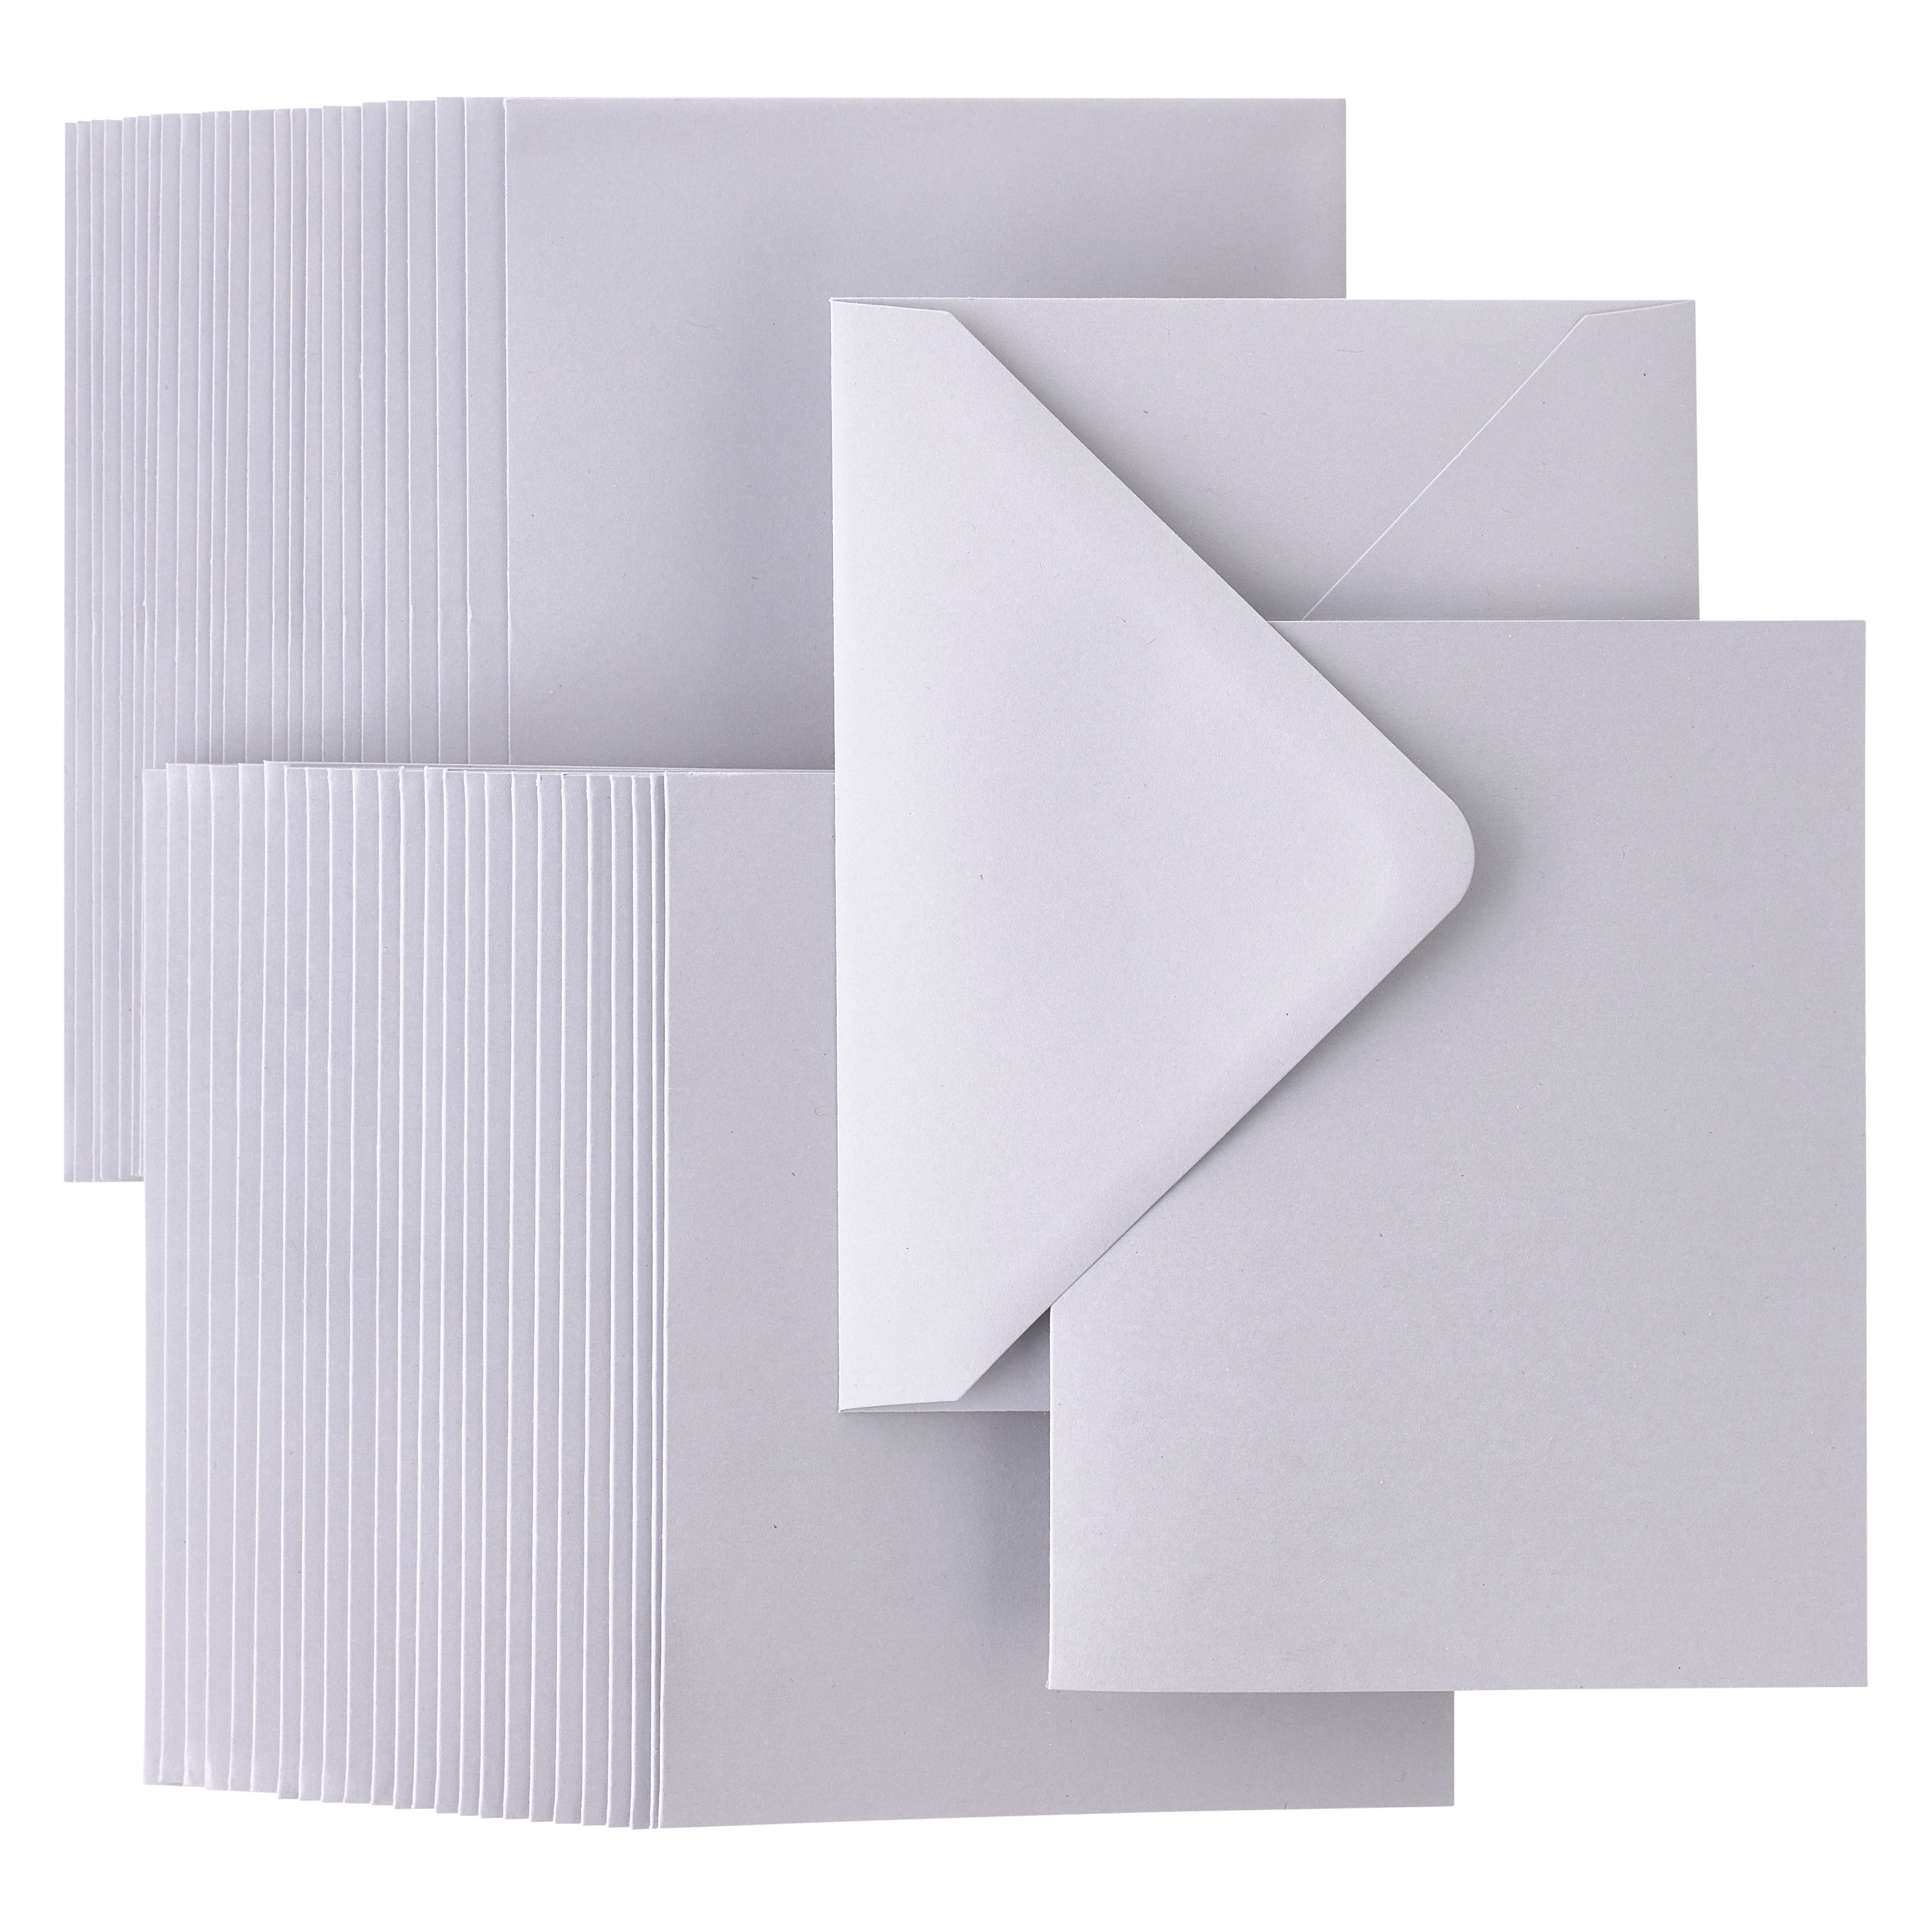 25ct Recollections Cardstock 4.25 X 5.5 A2 Paper You Choose Color From Set  1 